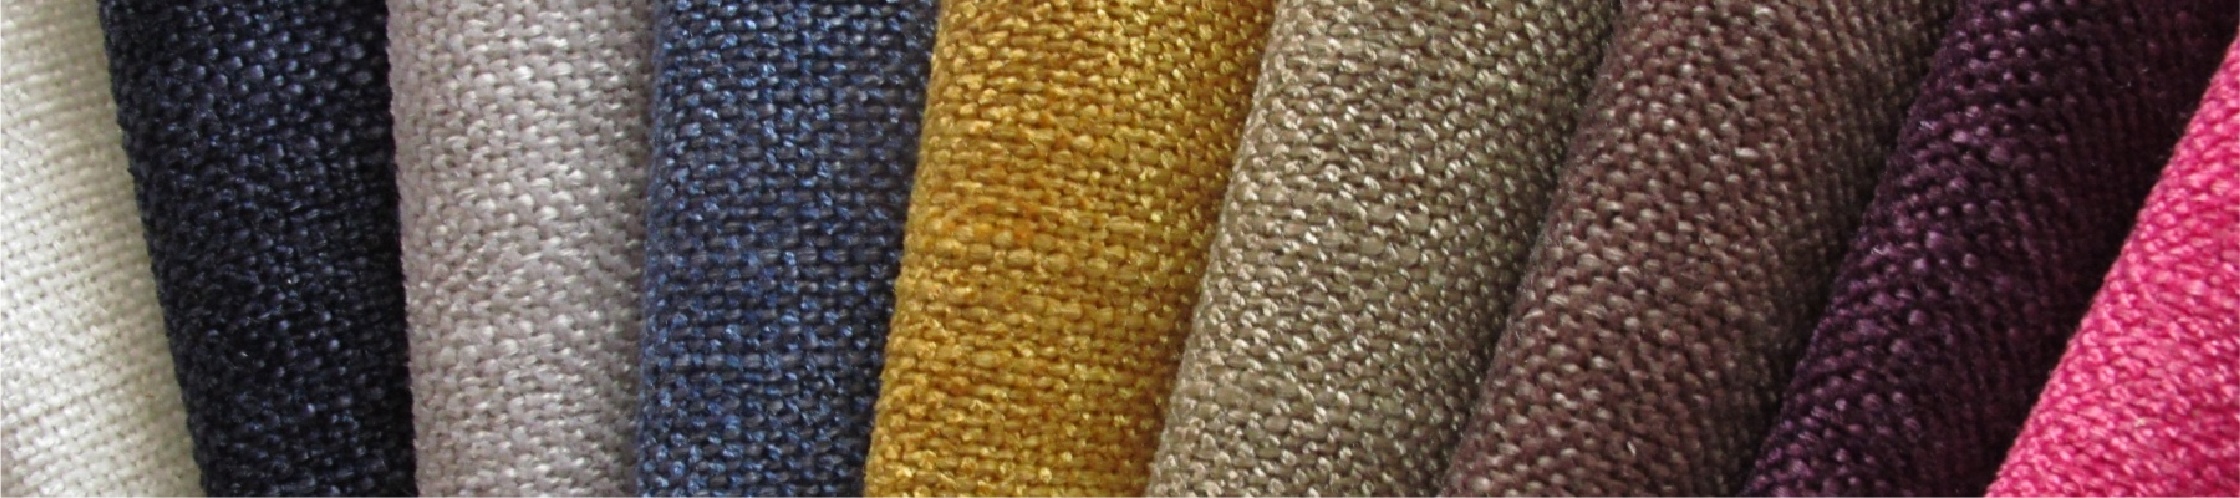 fabric upholstery